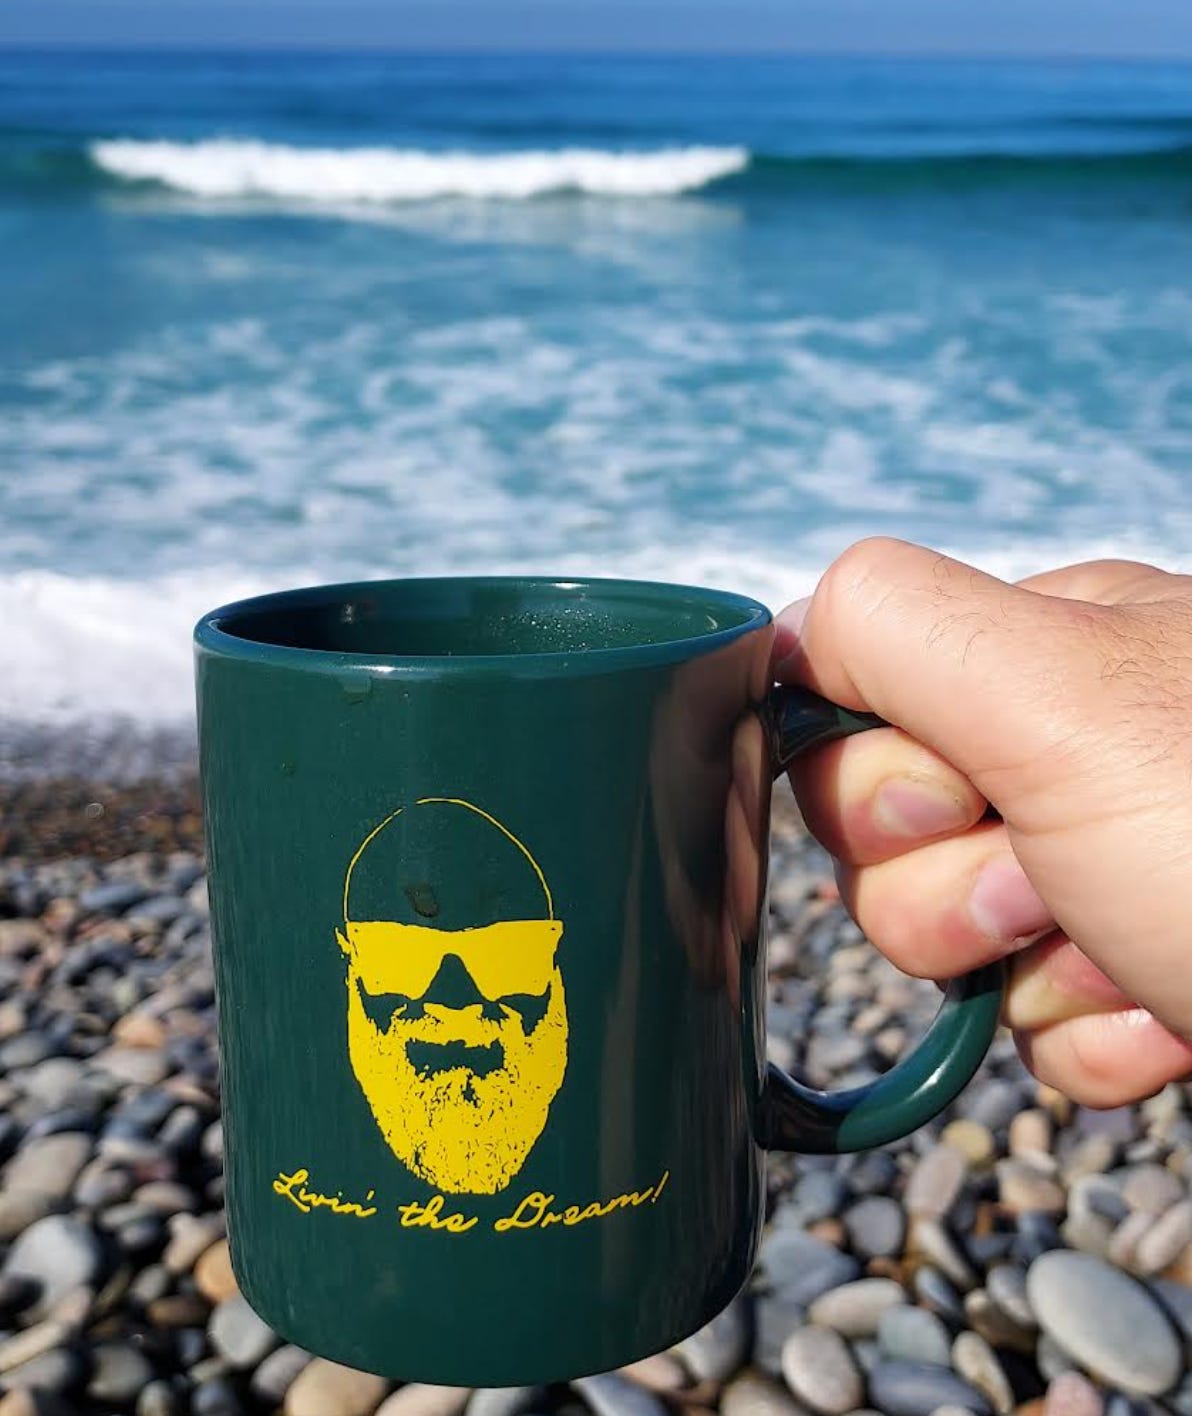 Close-up of a green coffee mug being held on the right of the frame up in front of a blurred wave crashing on beach rocks. The mug has a gold silhouette of a bearded man's head wearing sunglasses, and in text, it says, "Livin' the Dream."